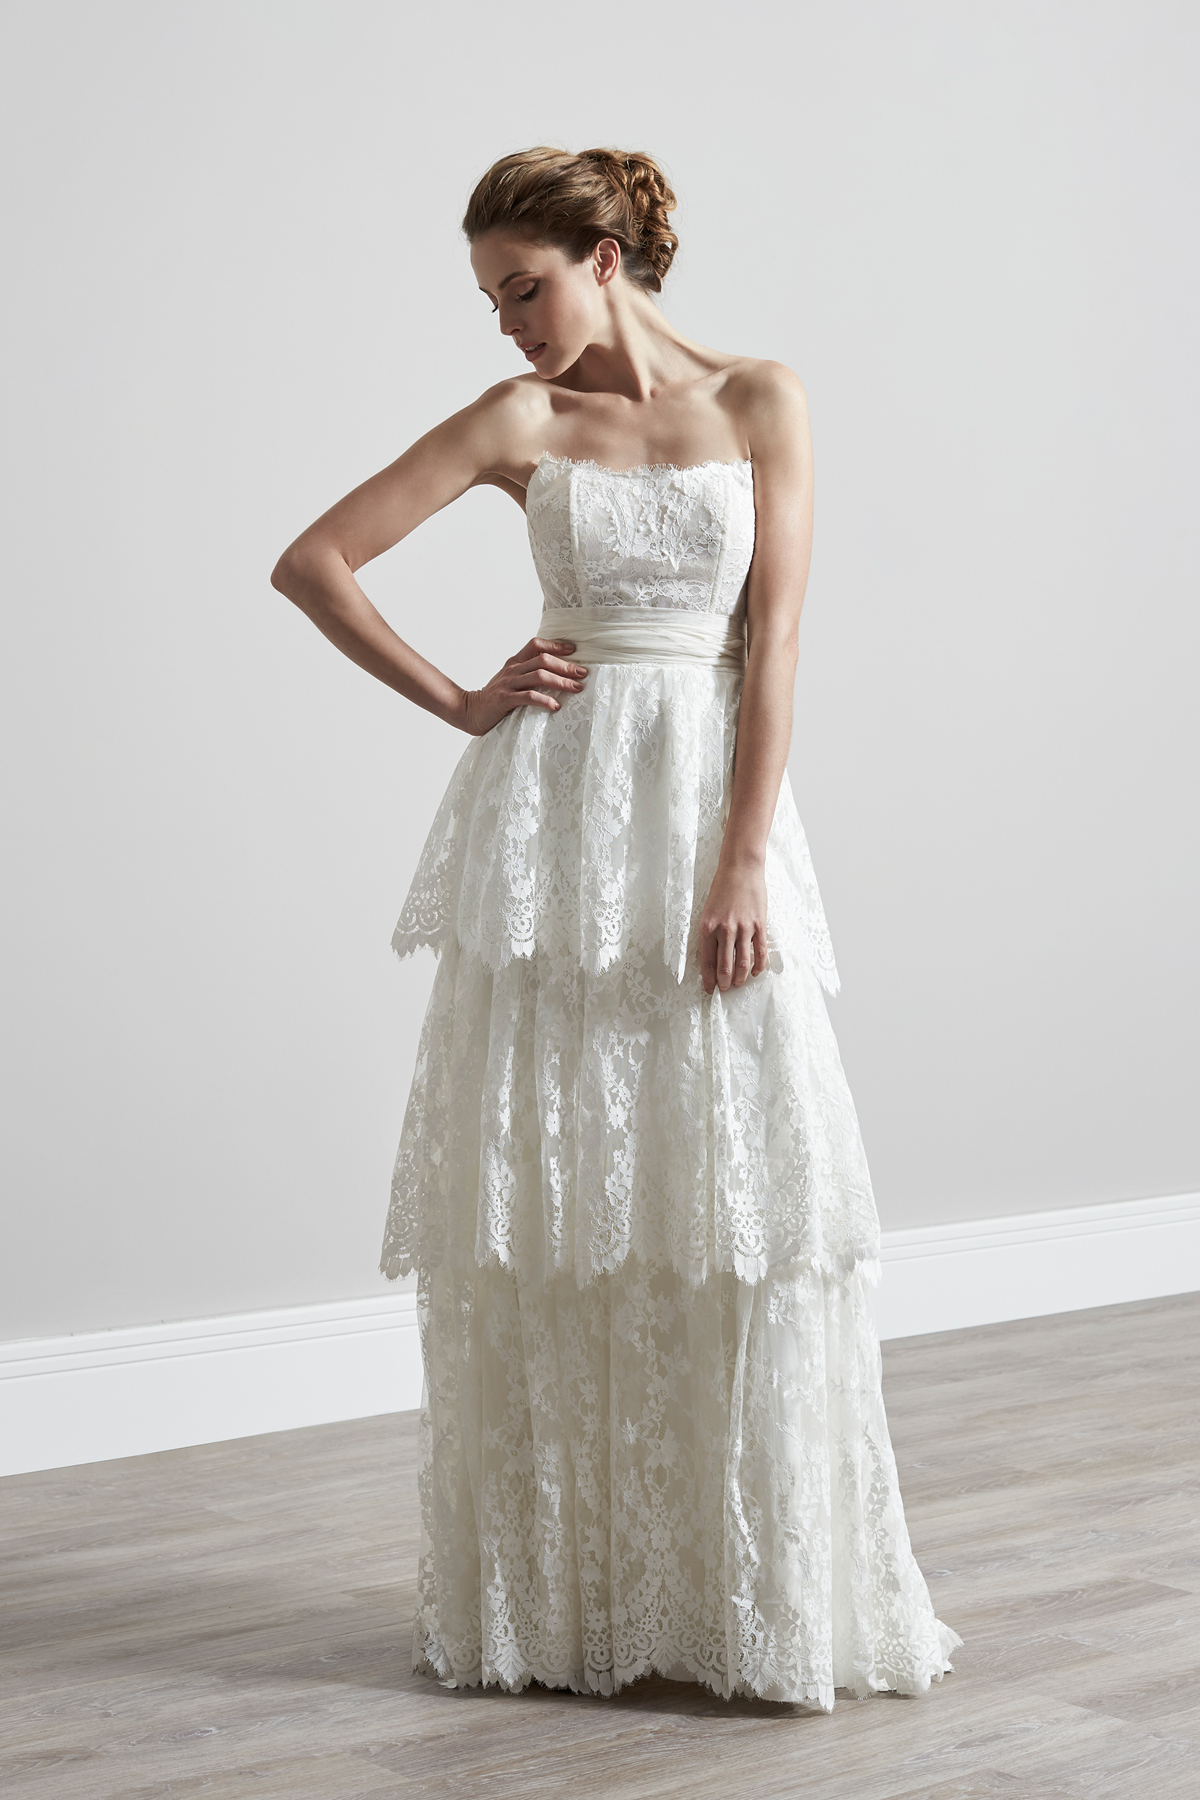  Sassi  Holford  Modern Romantic Wedding  Dresses  from the 